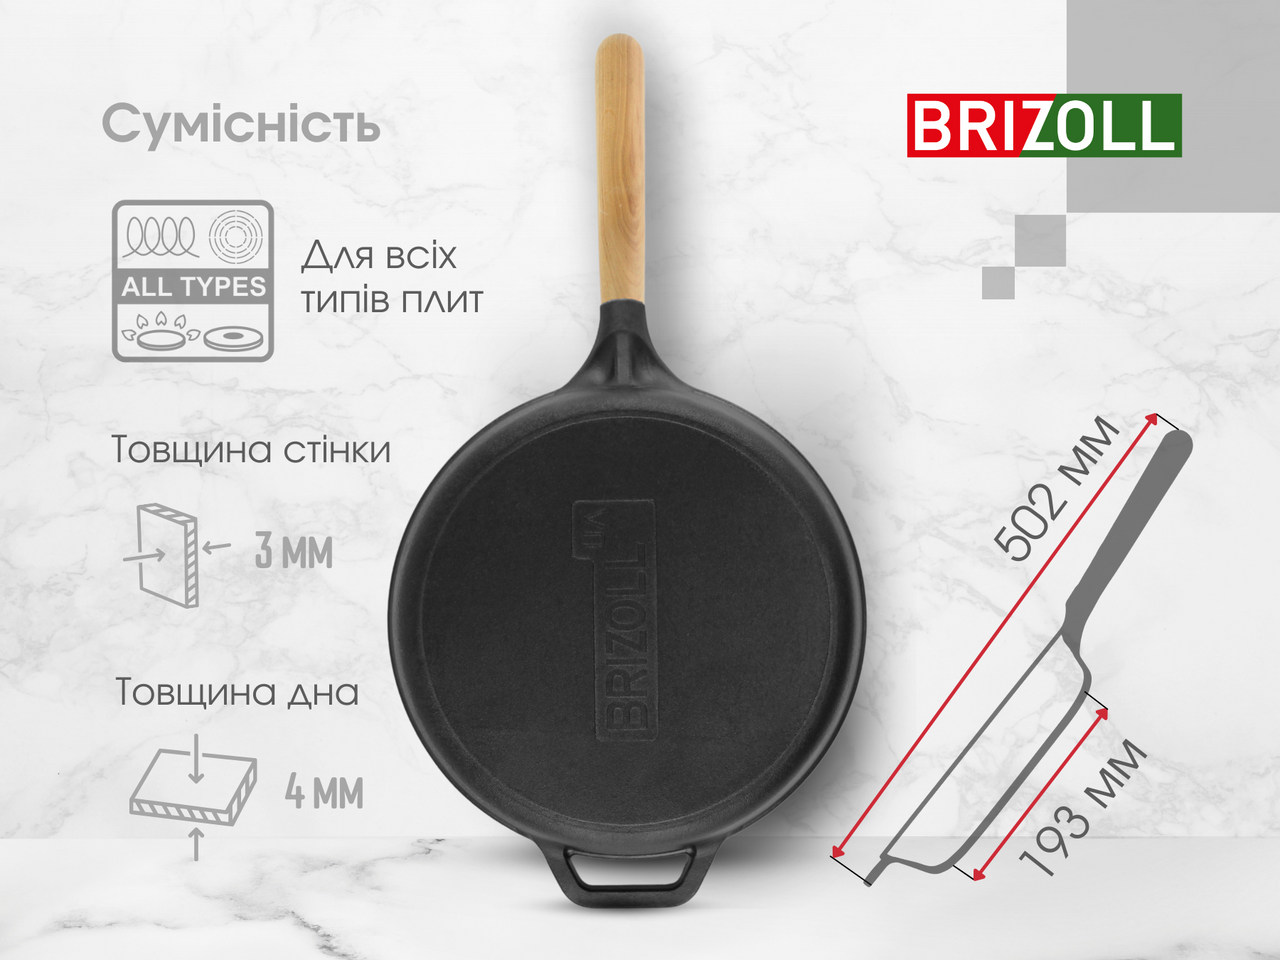 Cast iron pan NEXT 240 х 47 mm with a glass lid